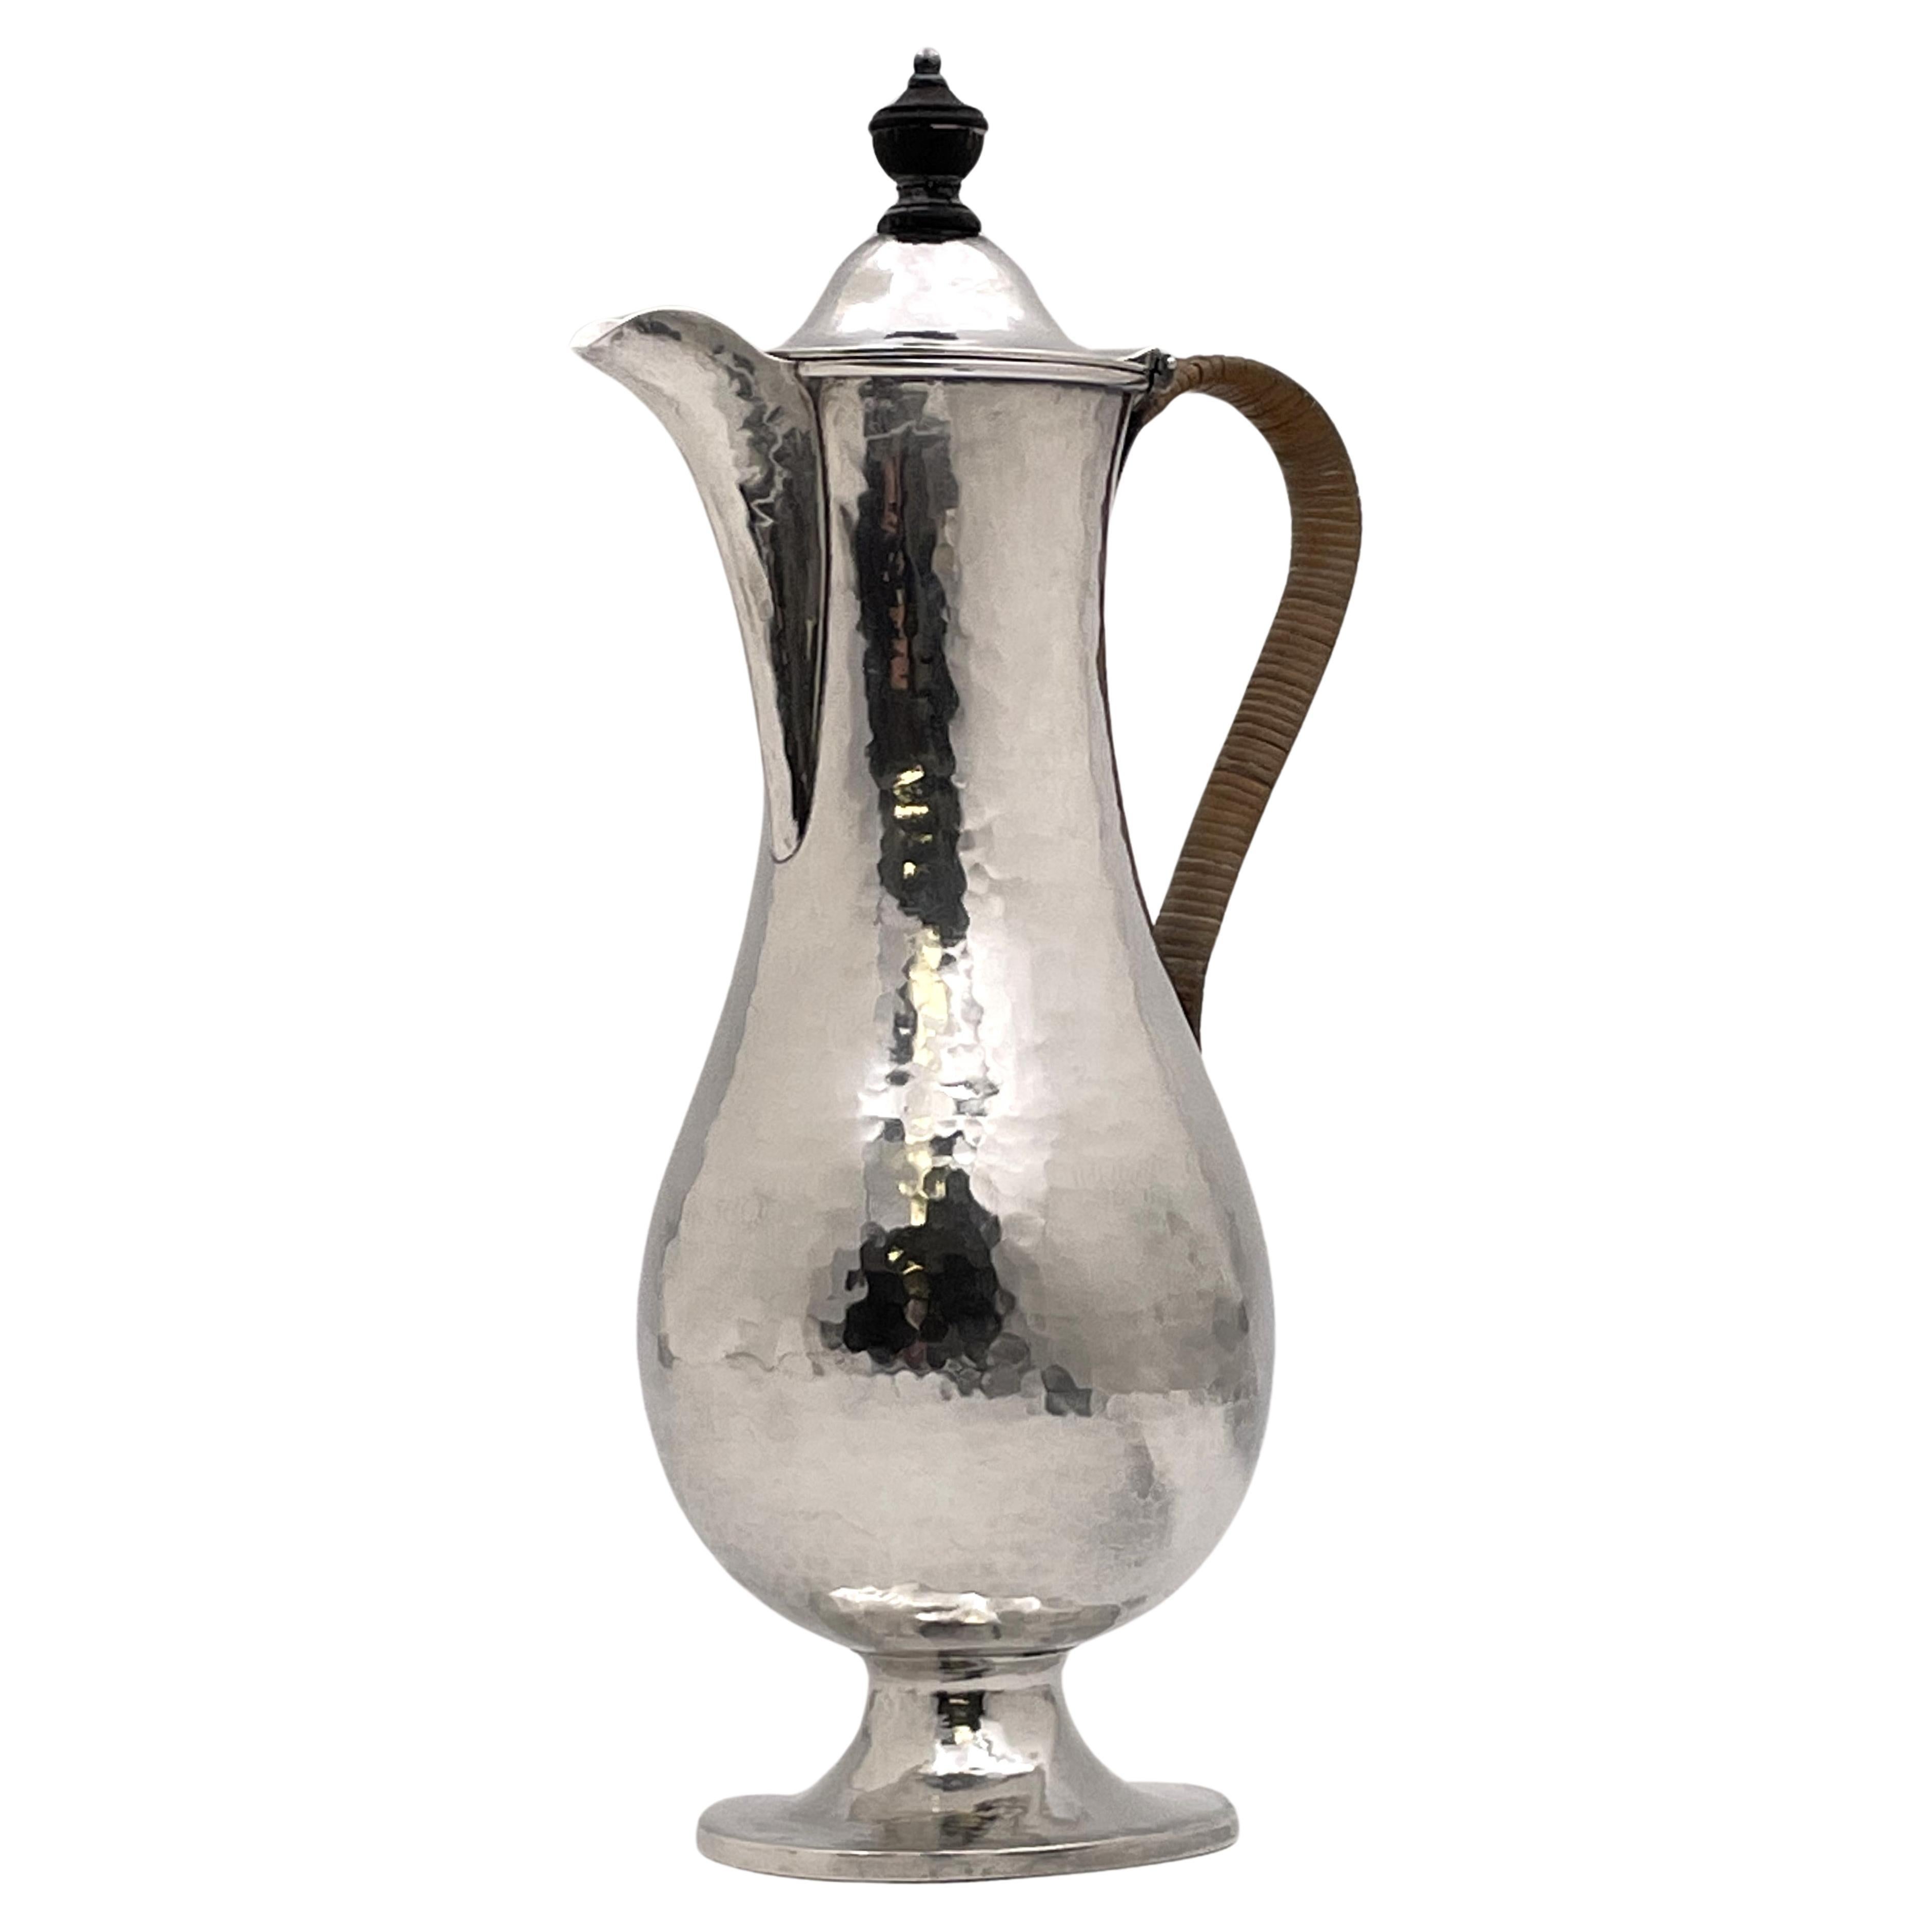 Crichton English Sterling Silver Hammered 1896 Coffee Pot in Arts & Crafts Style For Sale